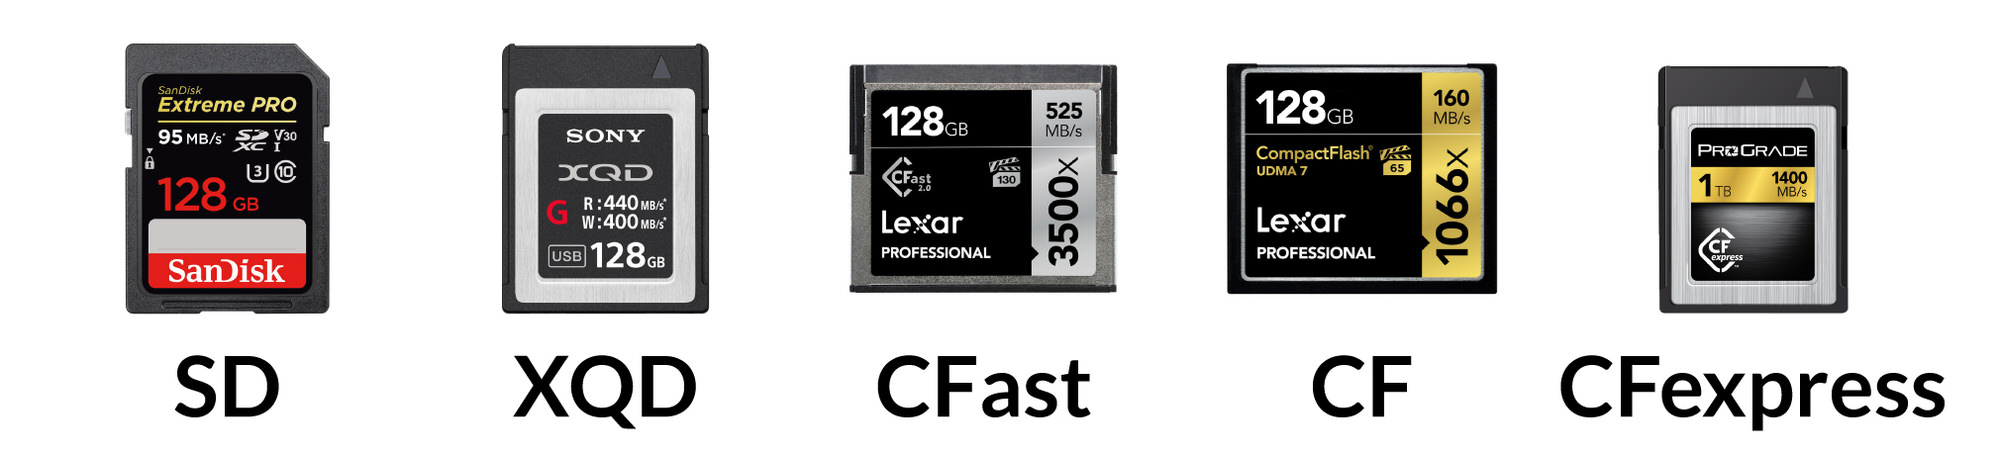 Xqd Cards: Everything You Need To Know + Cfexpress Comparison